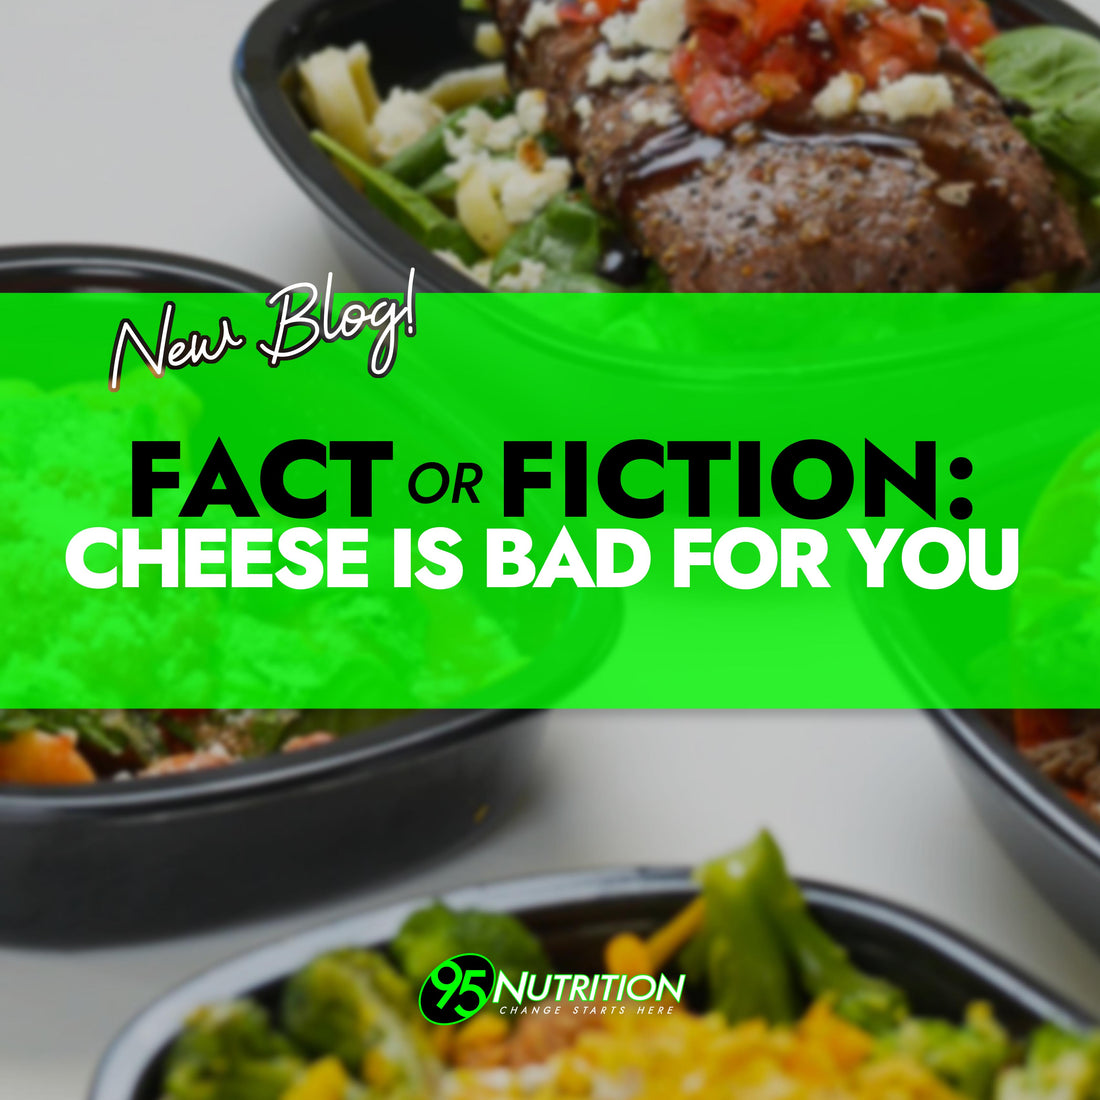 Fact or Fiction: Cheese is Bad for You